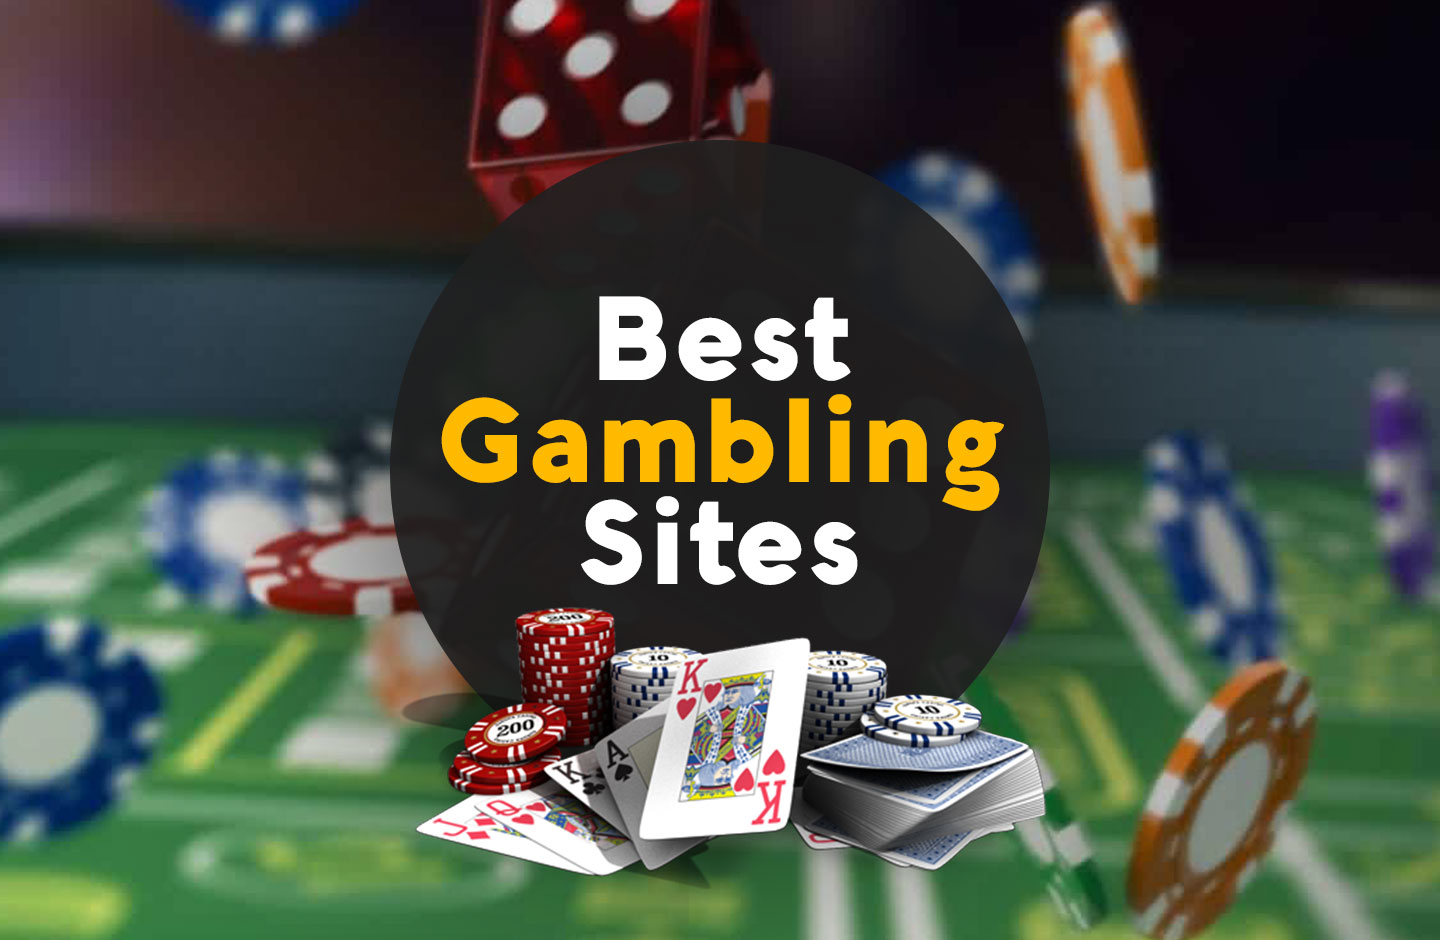 Get Rid of gambling Once and For All